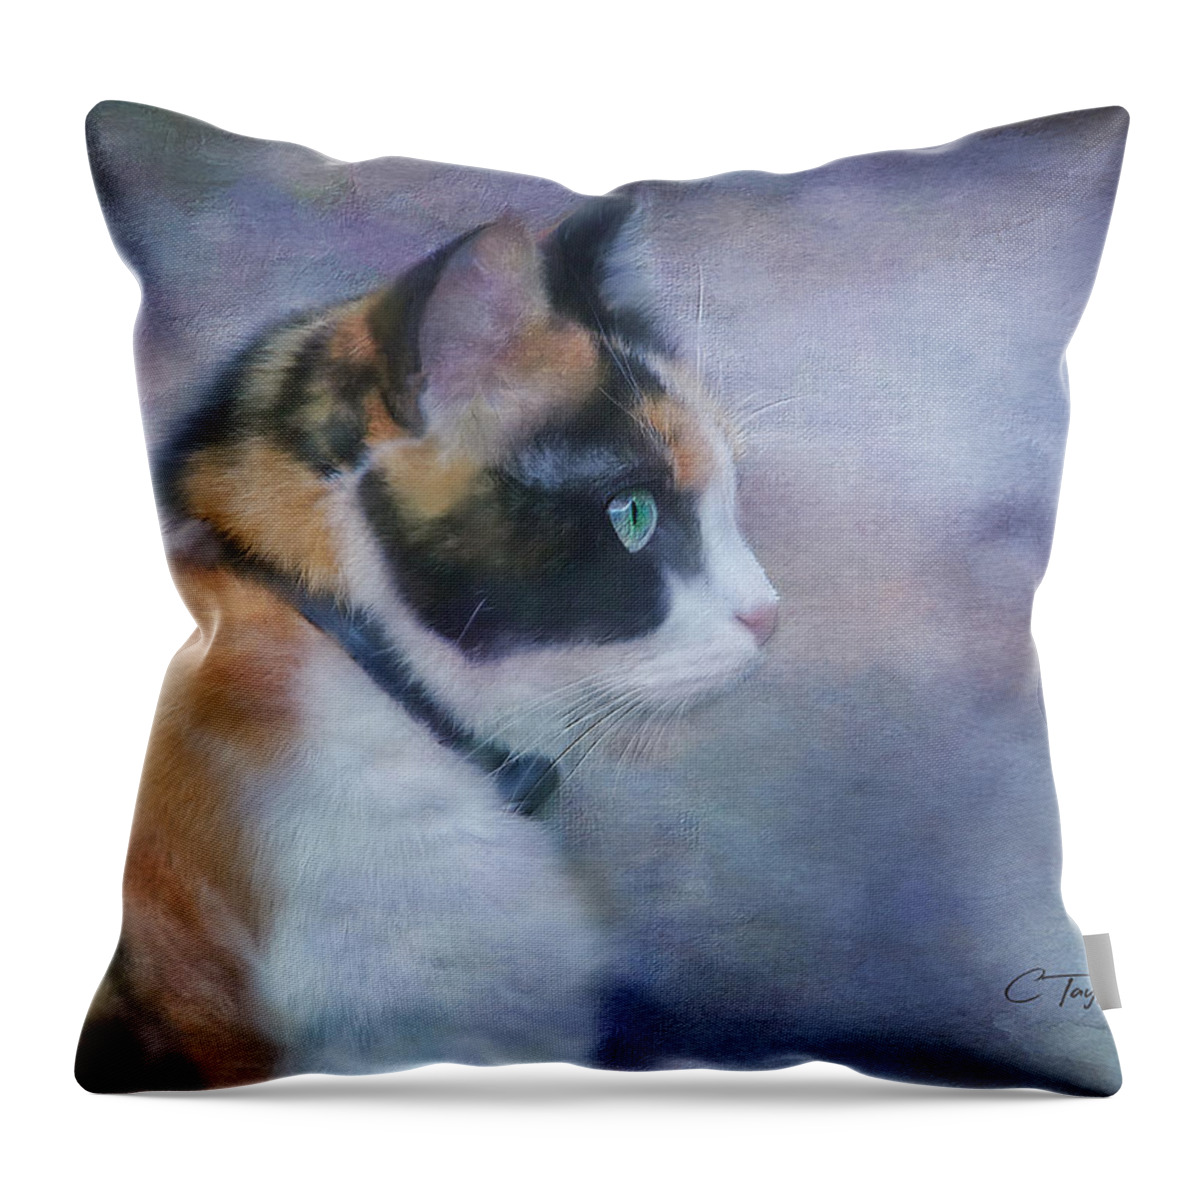 Cat Throw Pillow featuring the digital art The Calico Staredown by Colleen Taylor